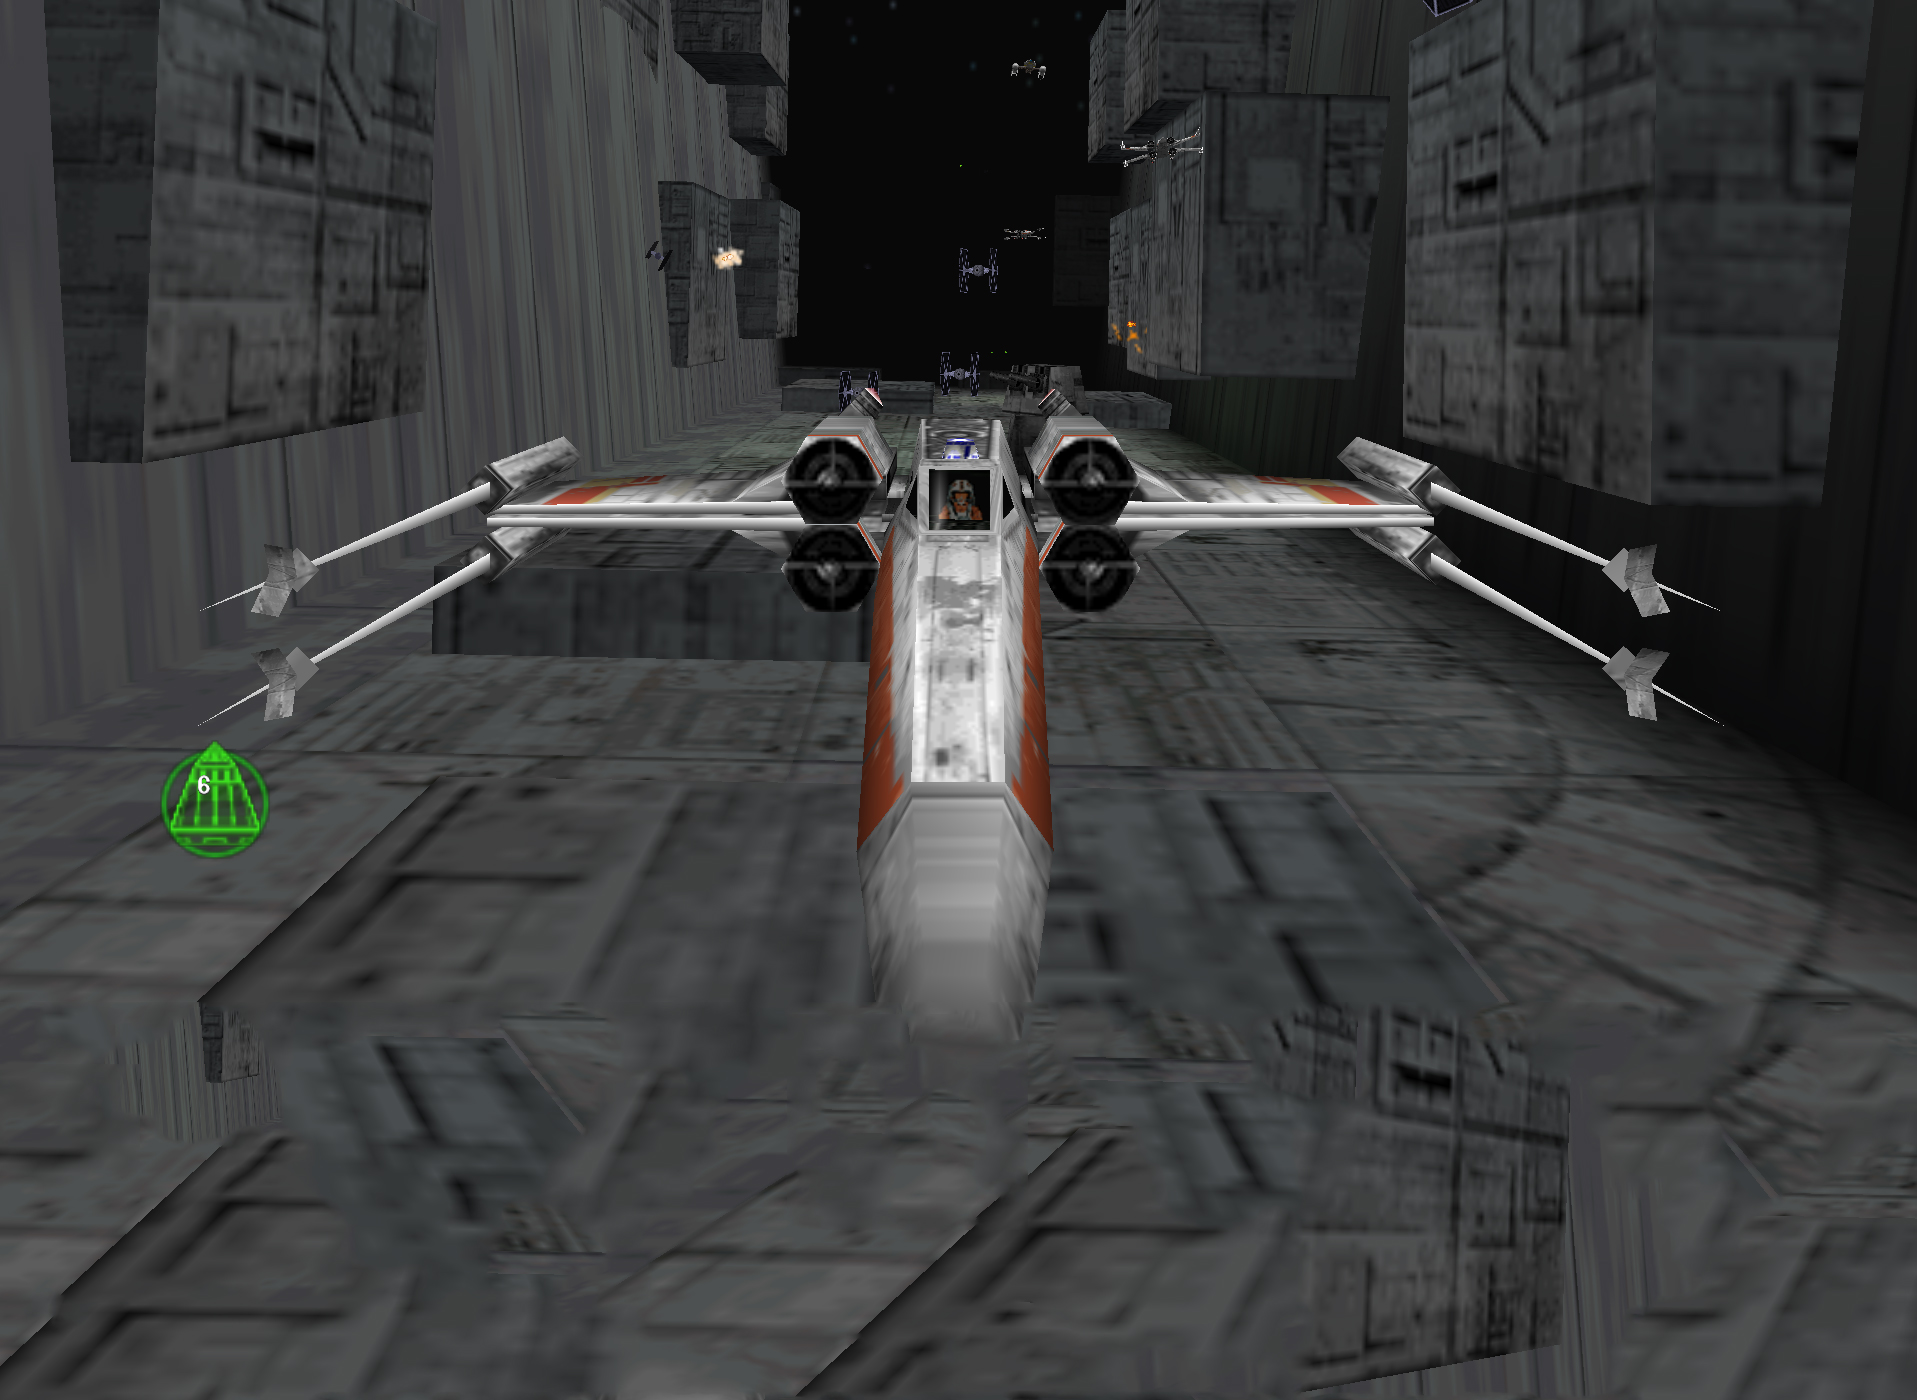 play rogue squadron 3d at higher resolution